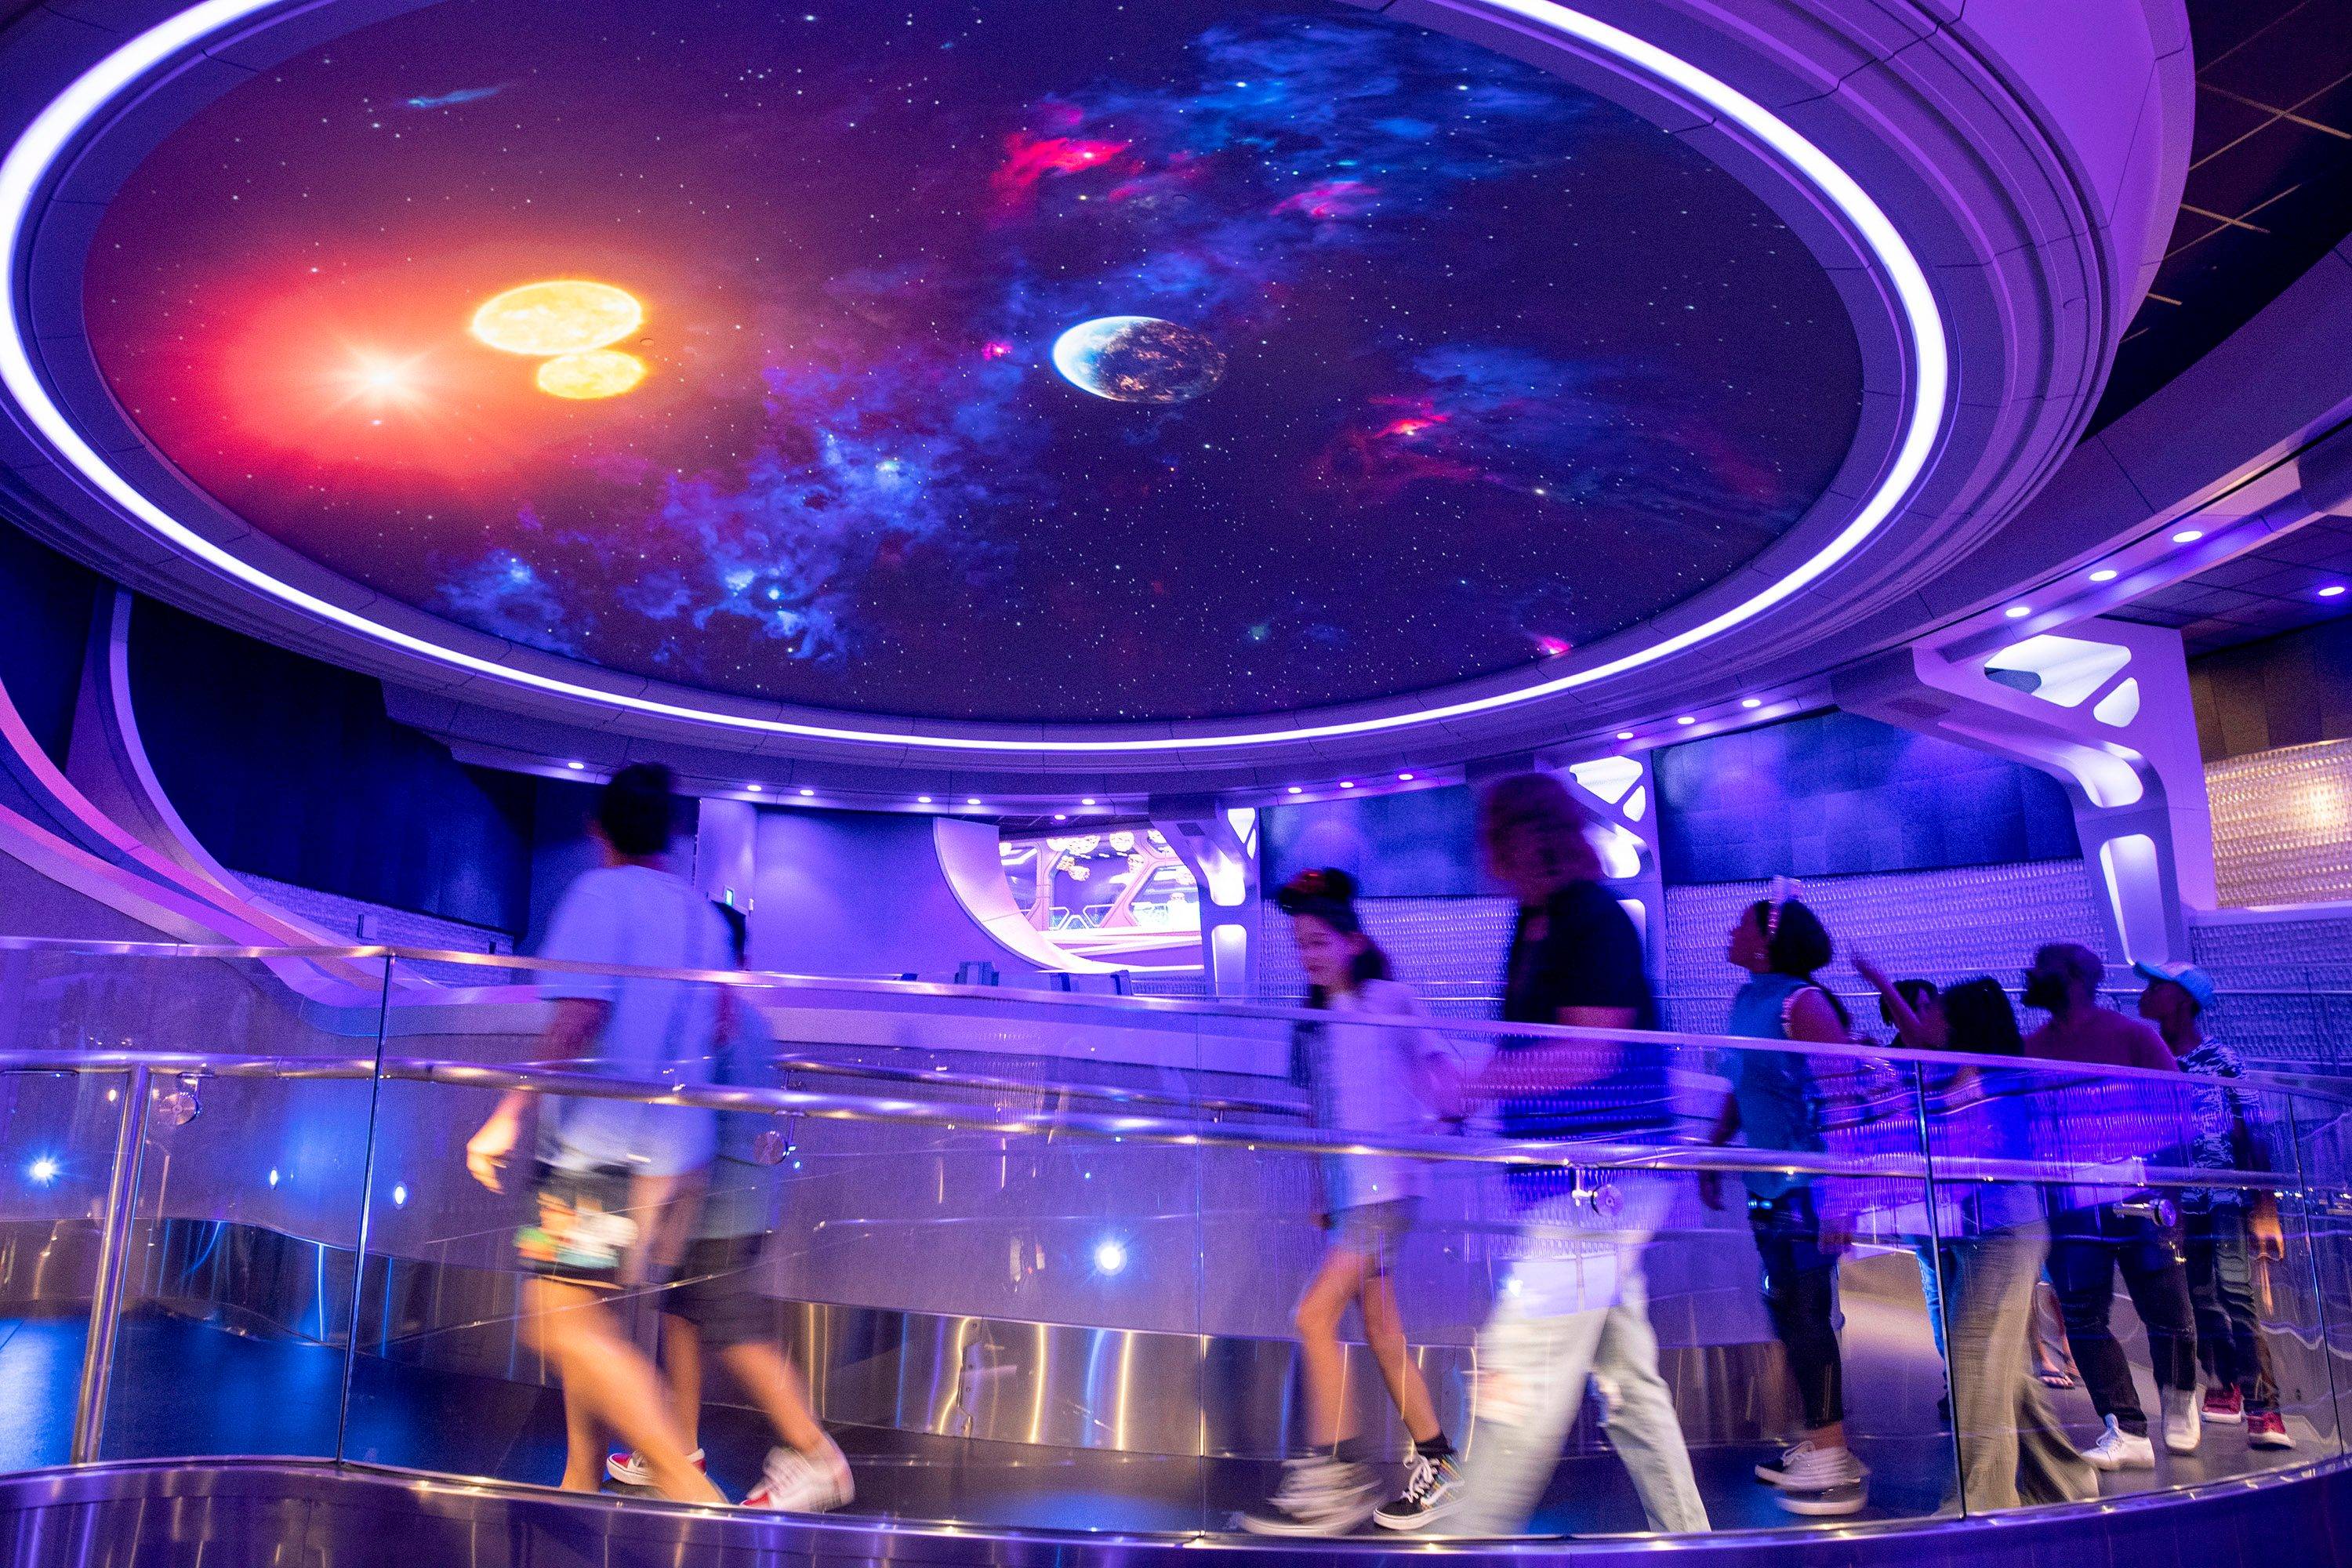 EPCOT guests visit the Galaxarium as part of their experience in Guardians of the Galaxy: Cosmic Rewind